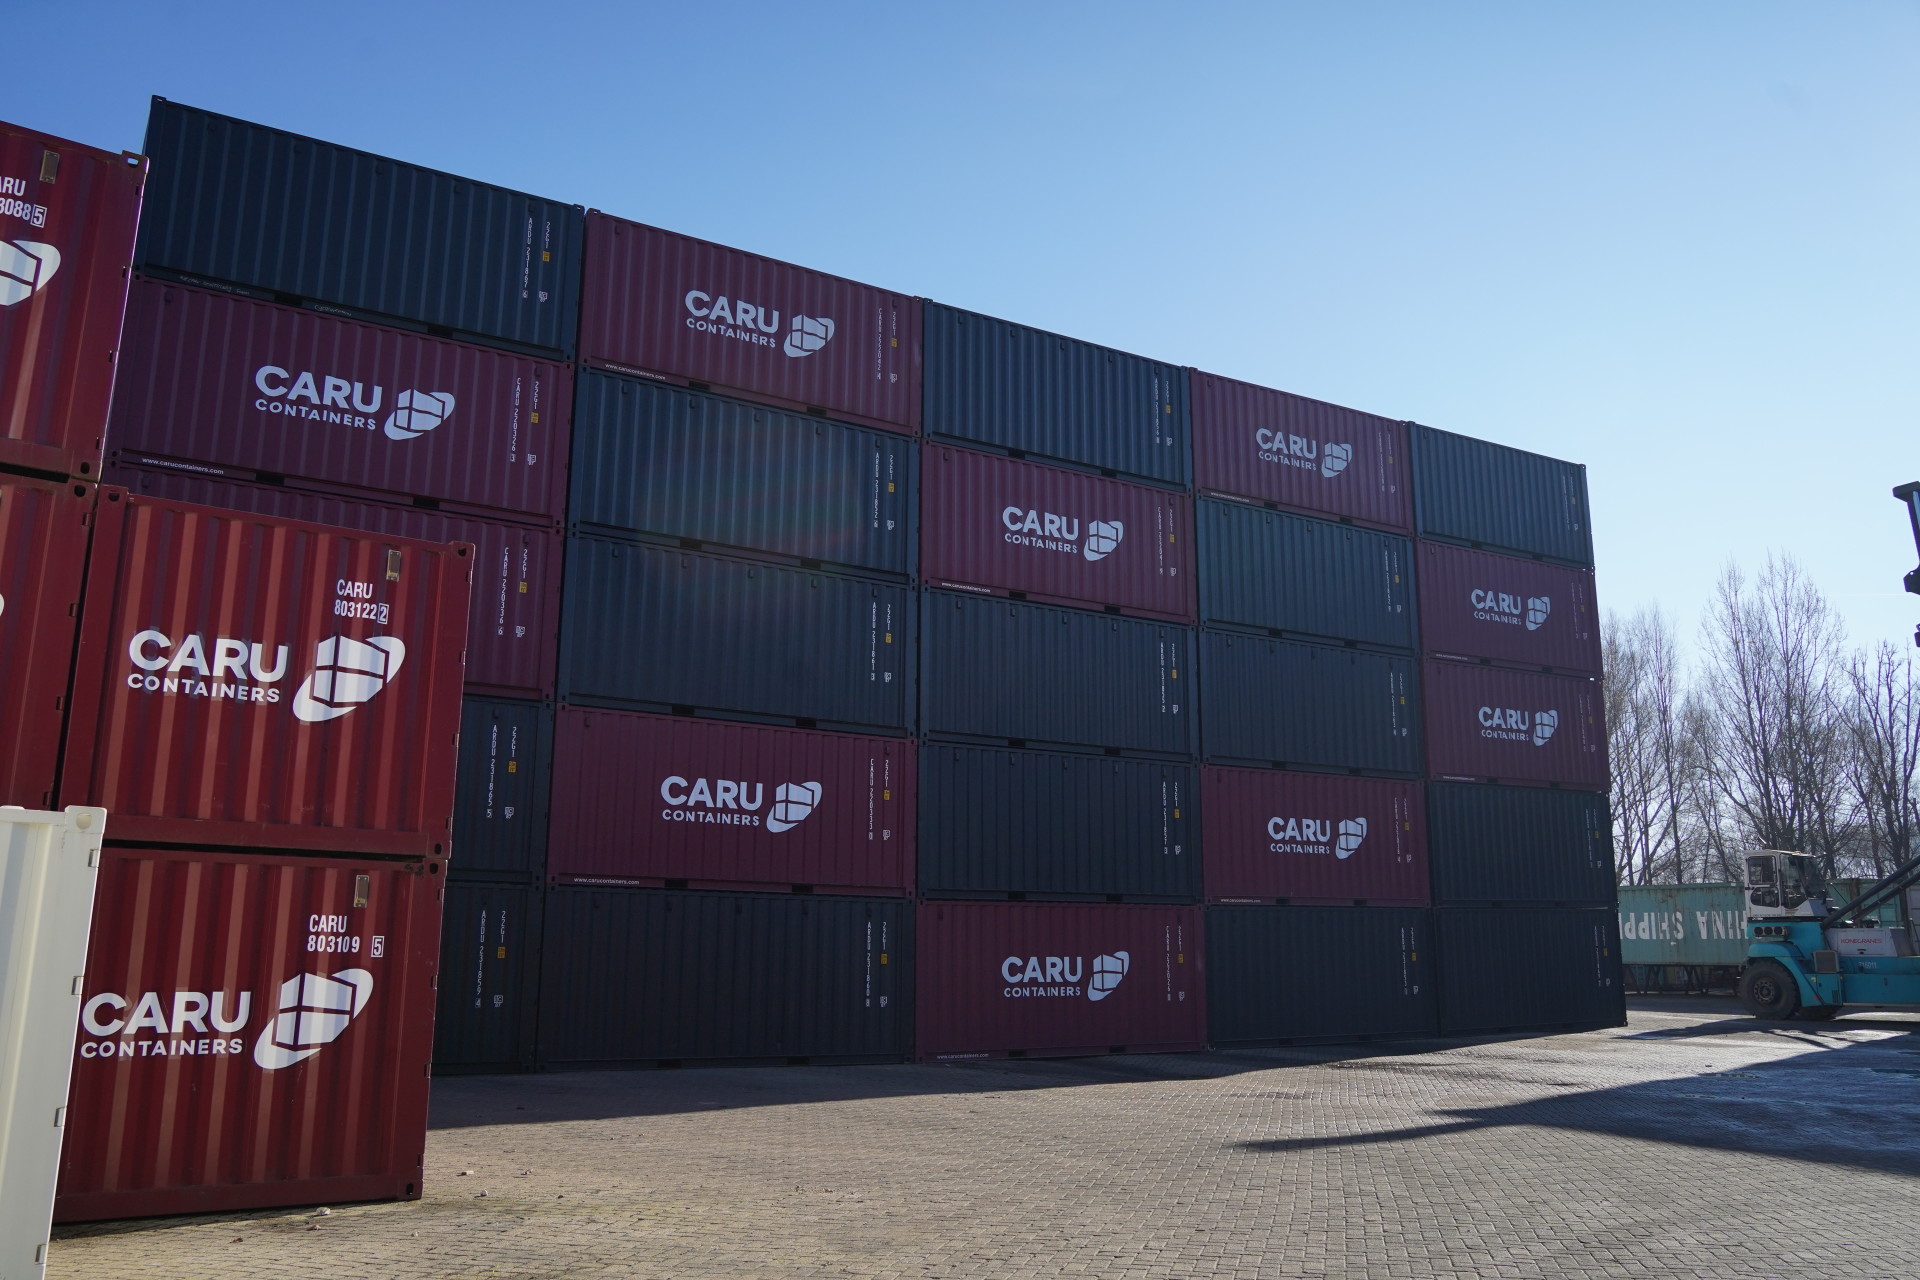 The Most Popular Items Shipped Via Containers - West Gulf Container